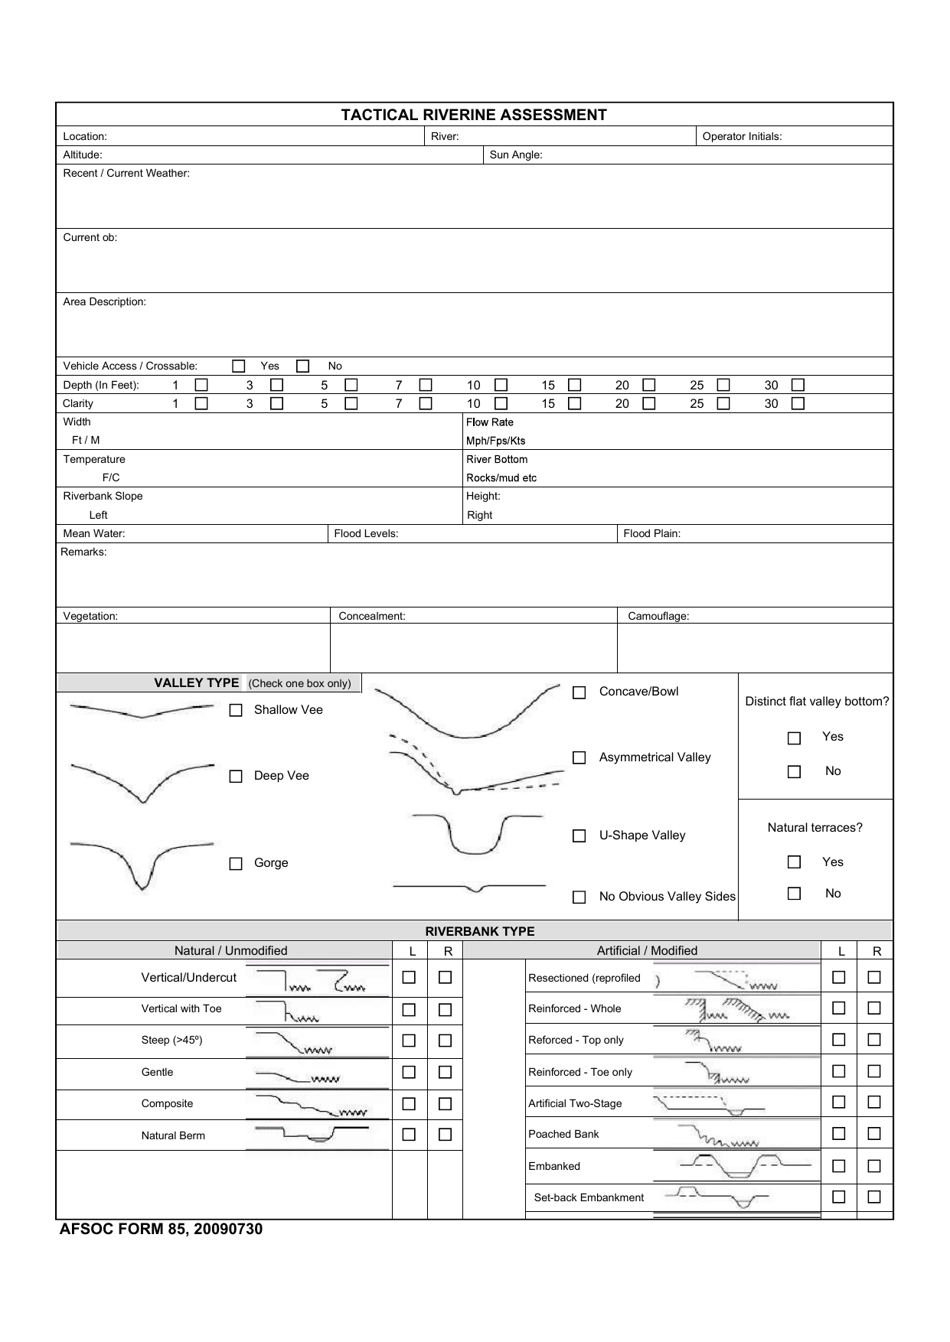 AFSOC Form 85 Tactical Riverine Assessment, Page 1